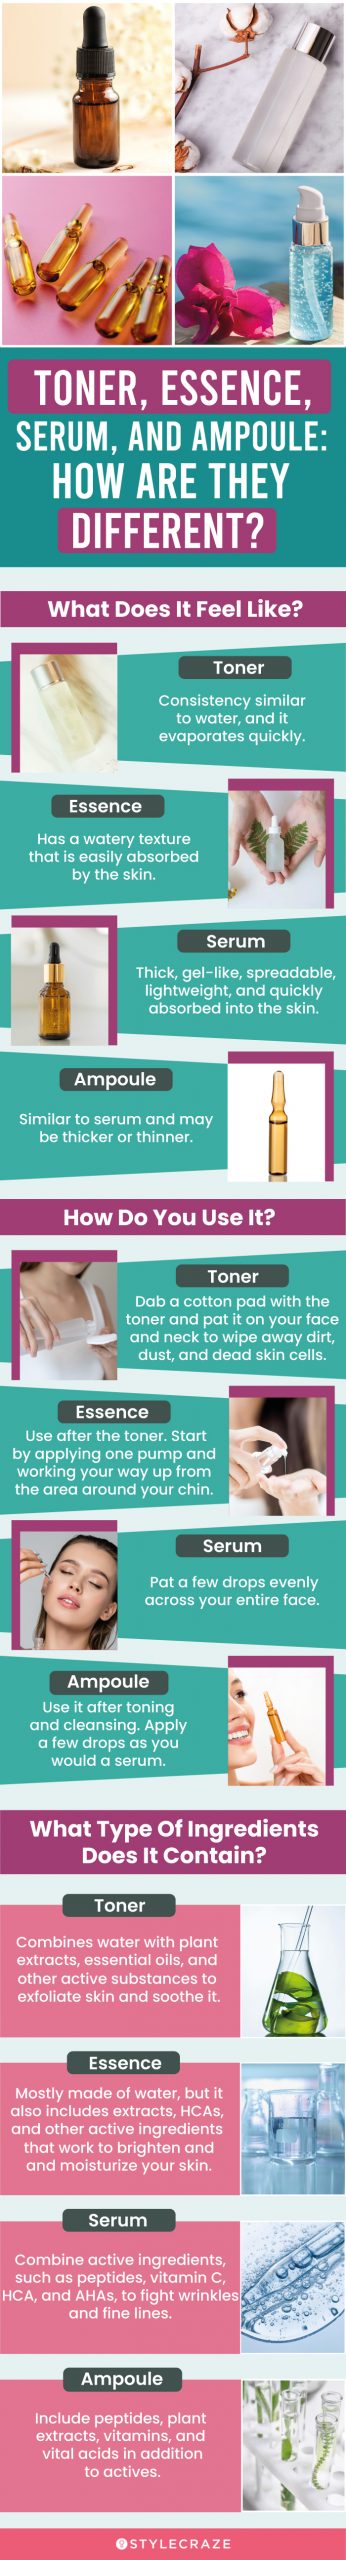 toner, essence, serum, and ampoule how are they different (infographic)